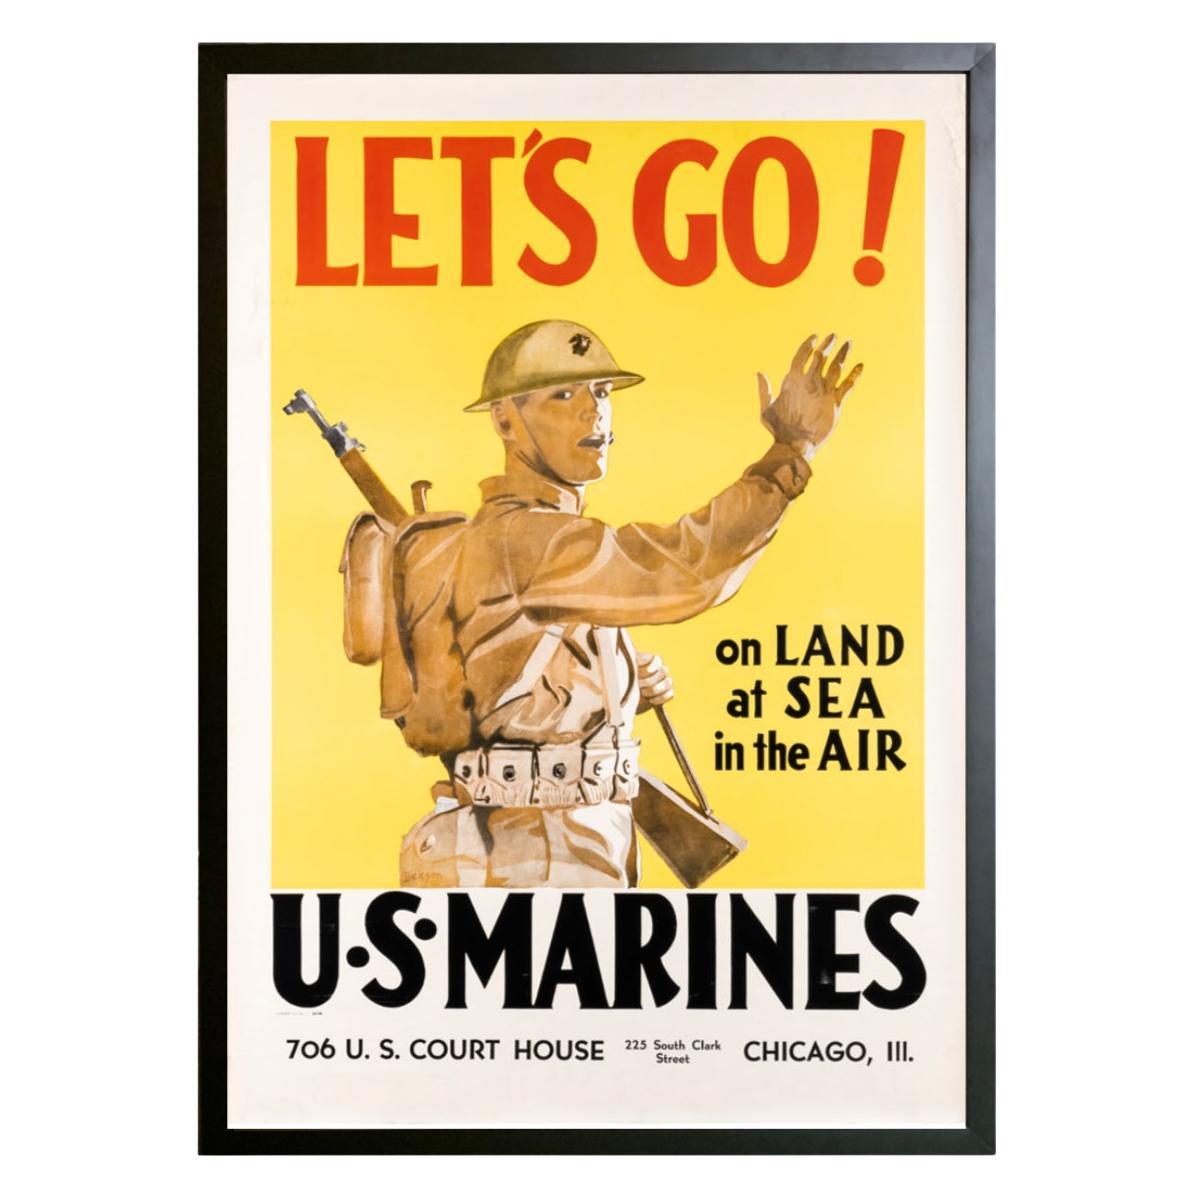 "Let's Go. U.S. Marines" Vintage WWII Recruitment Poster by Dickson, 1941 For Sale